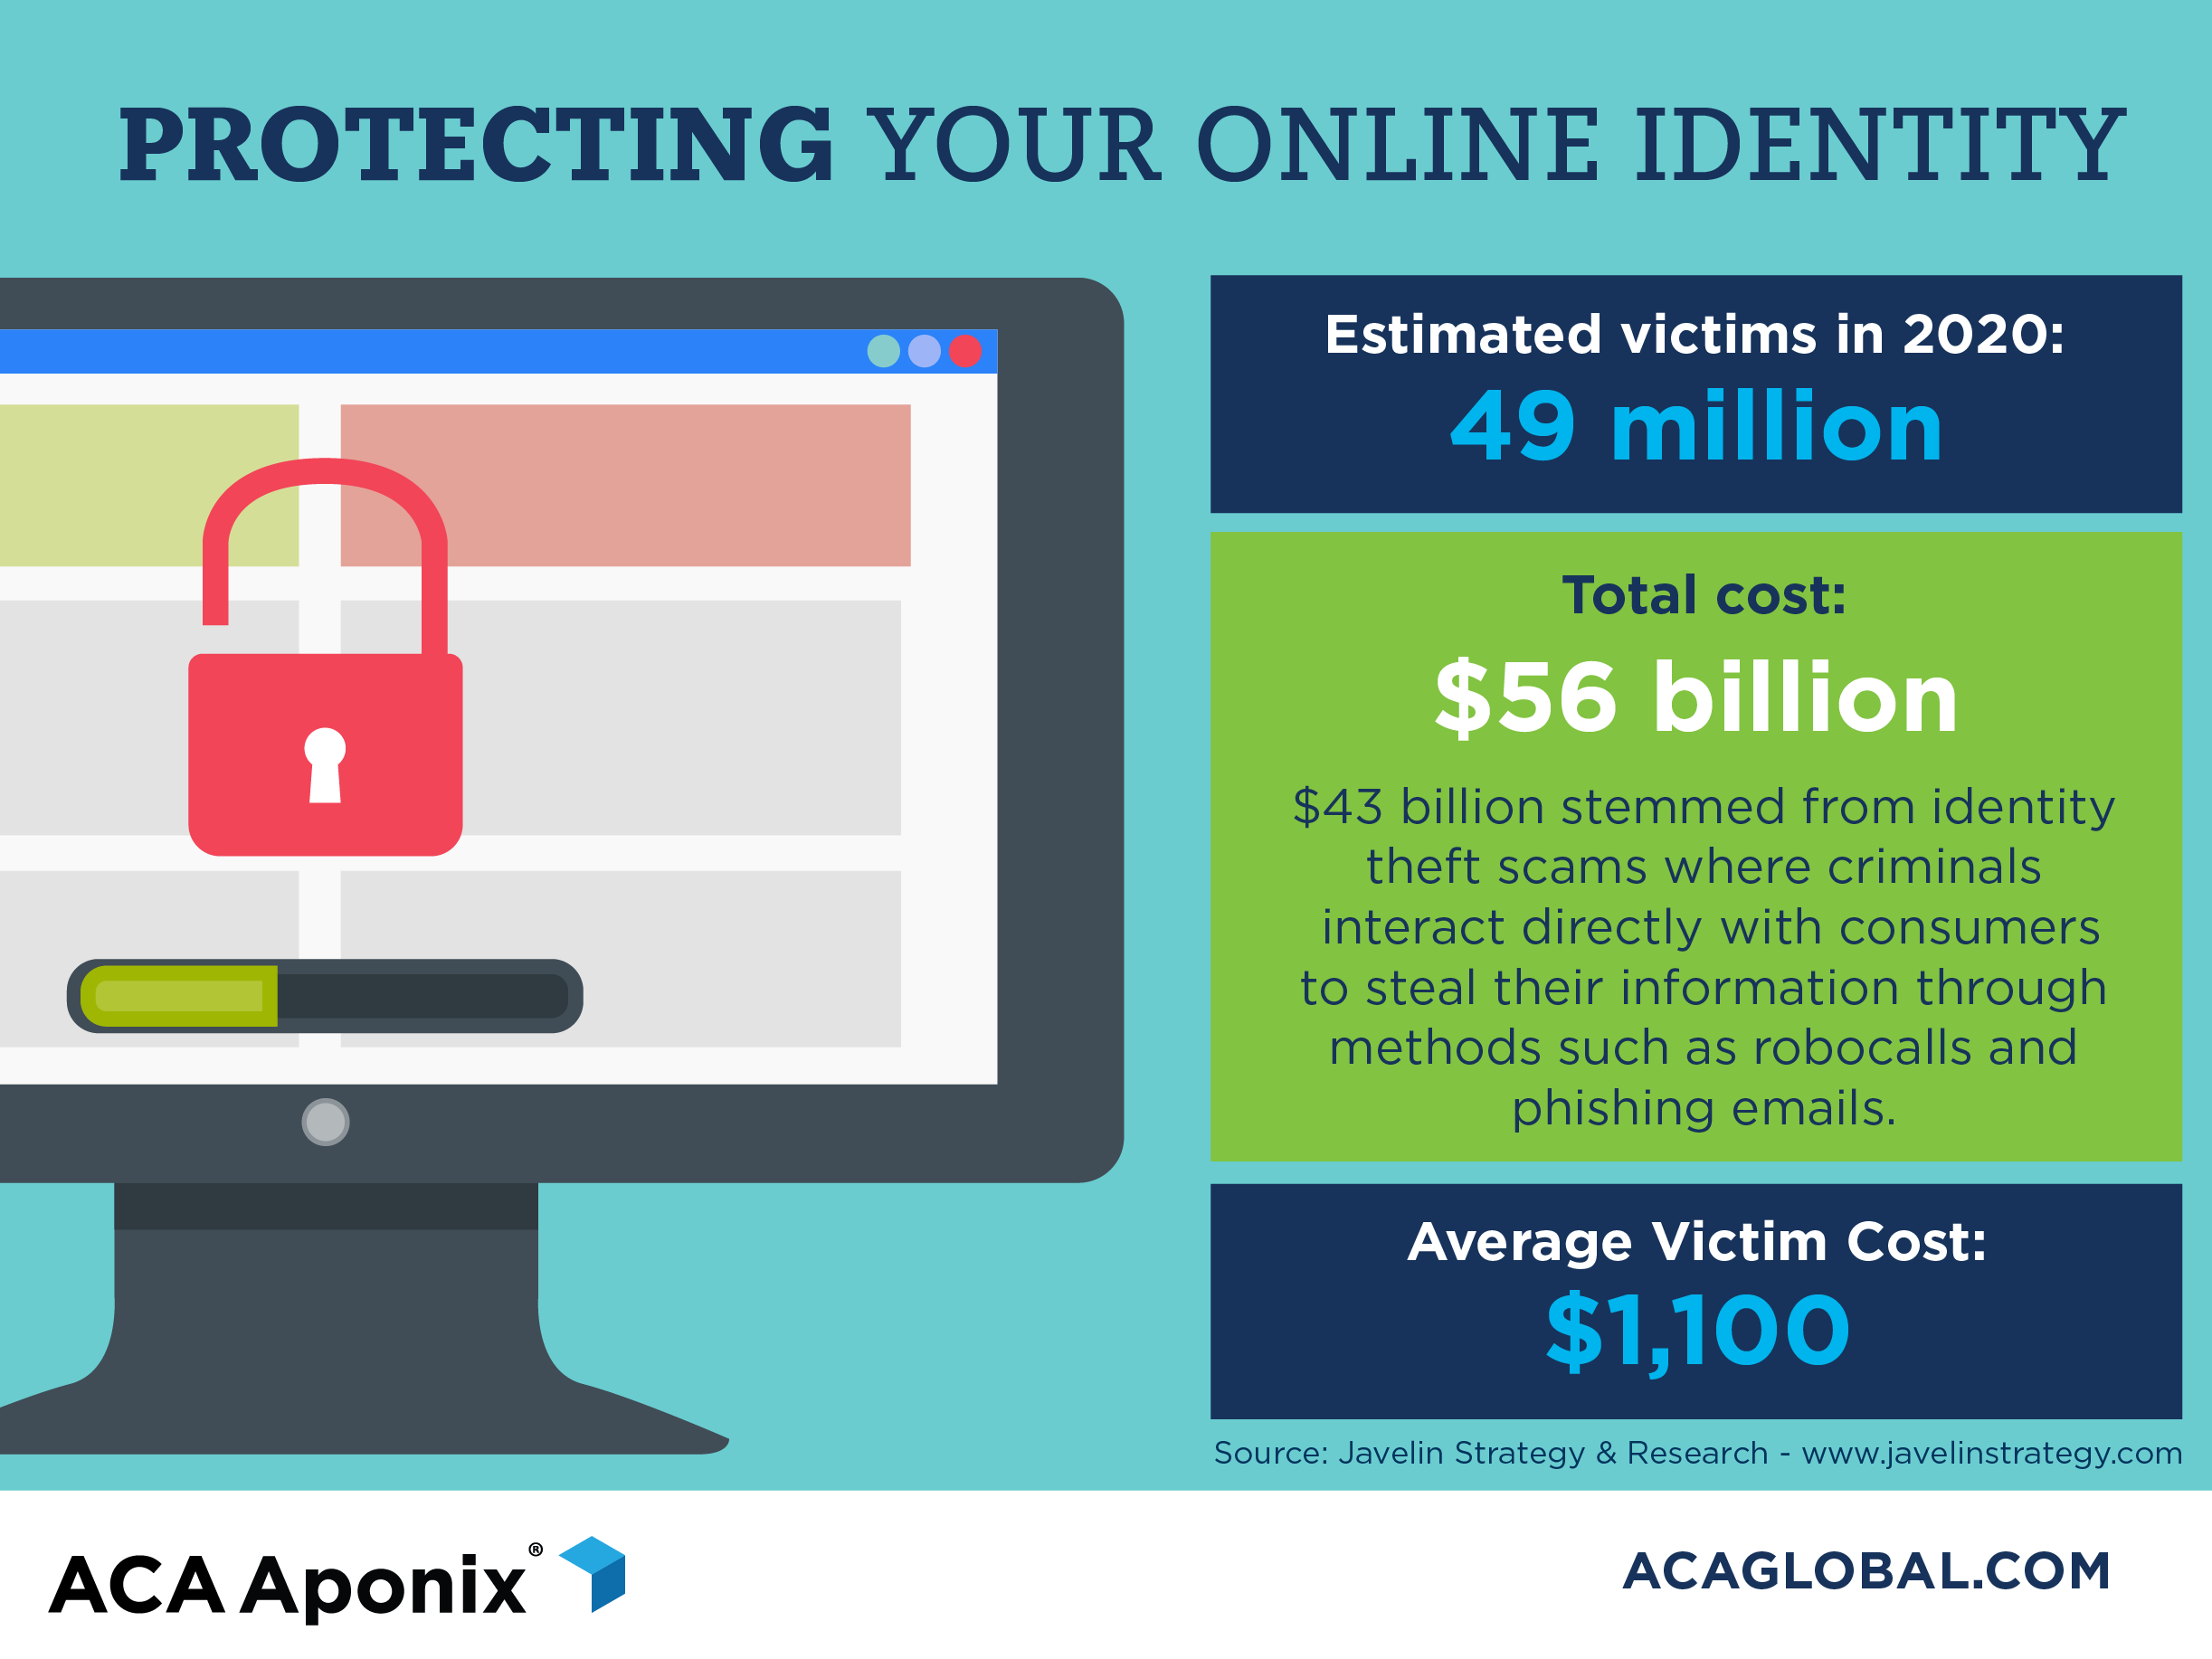 How to protect your online gaming platform from ID frauds?